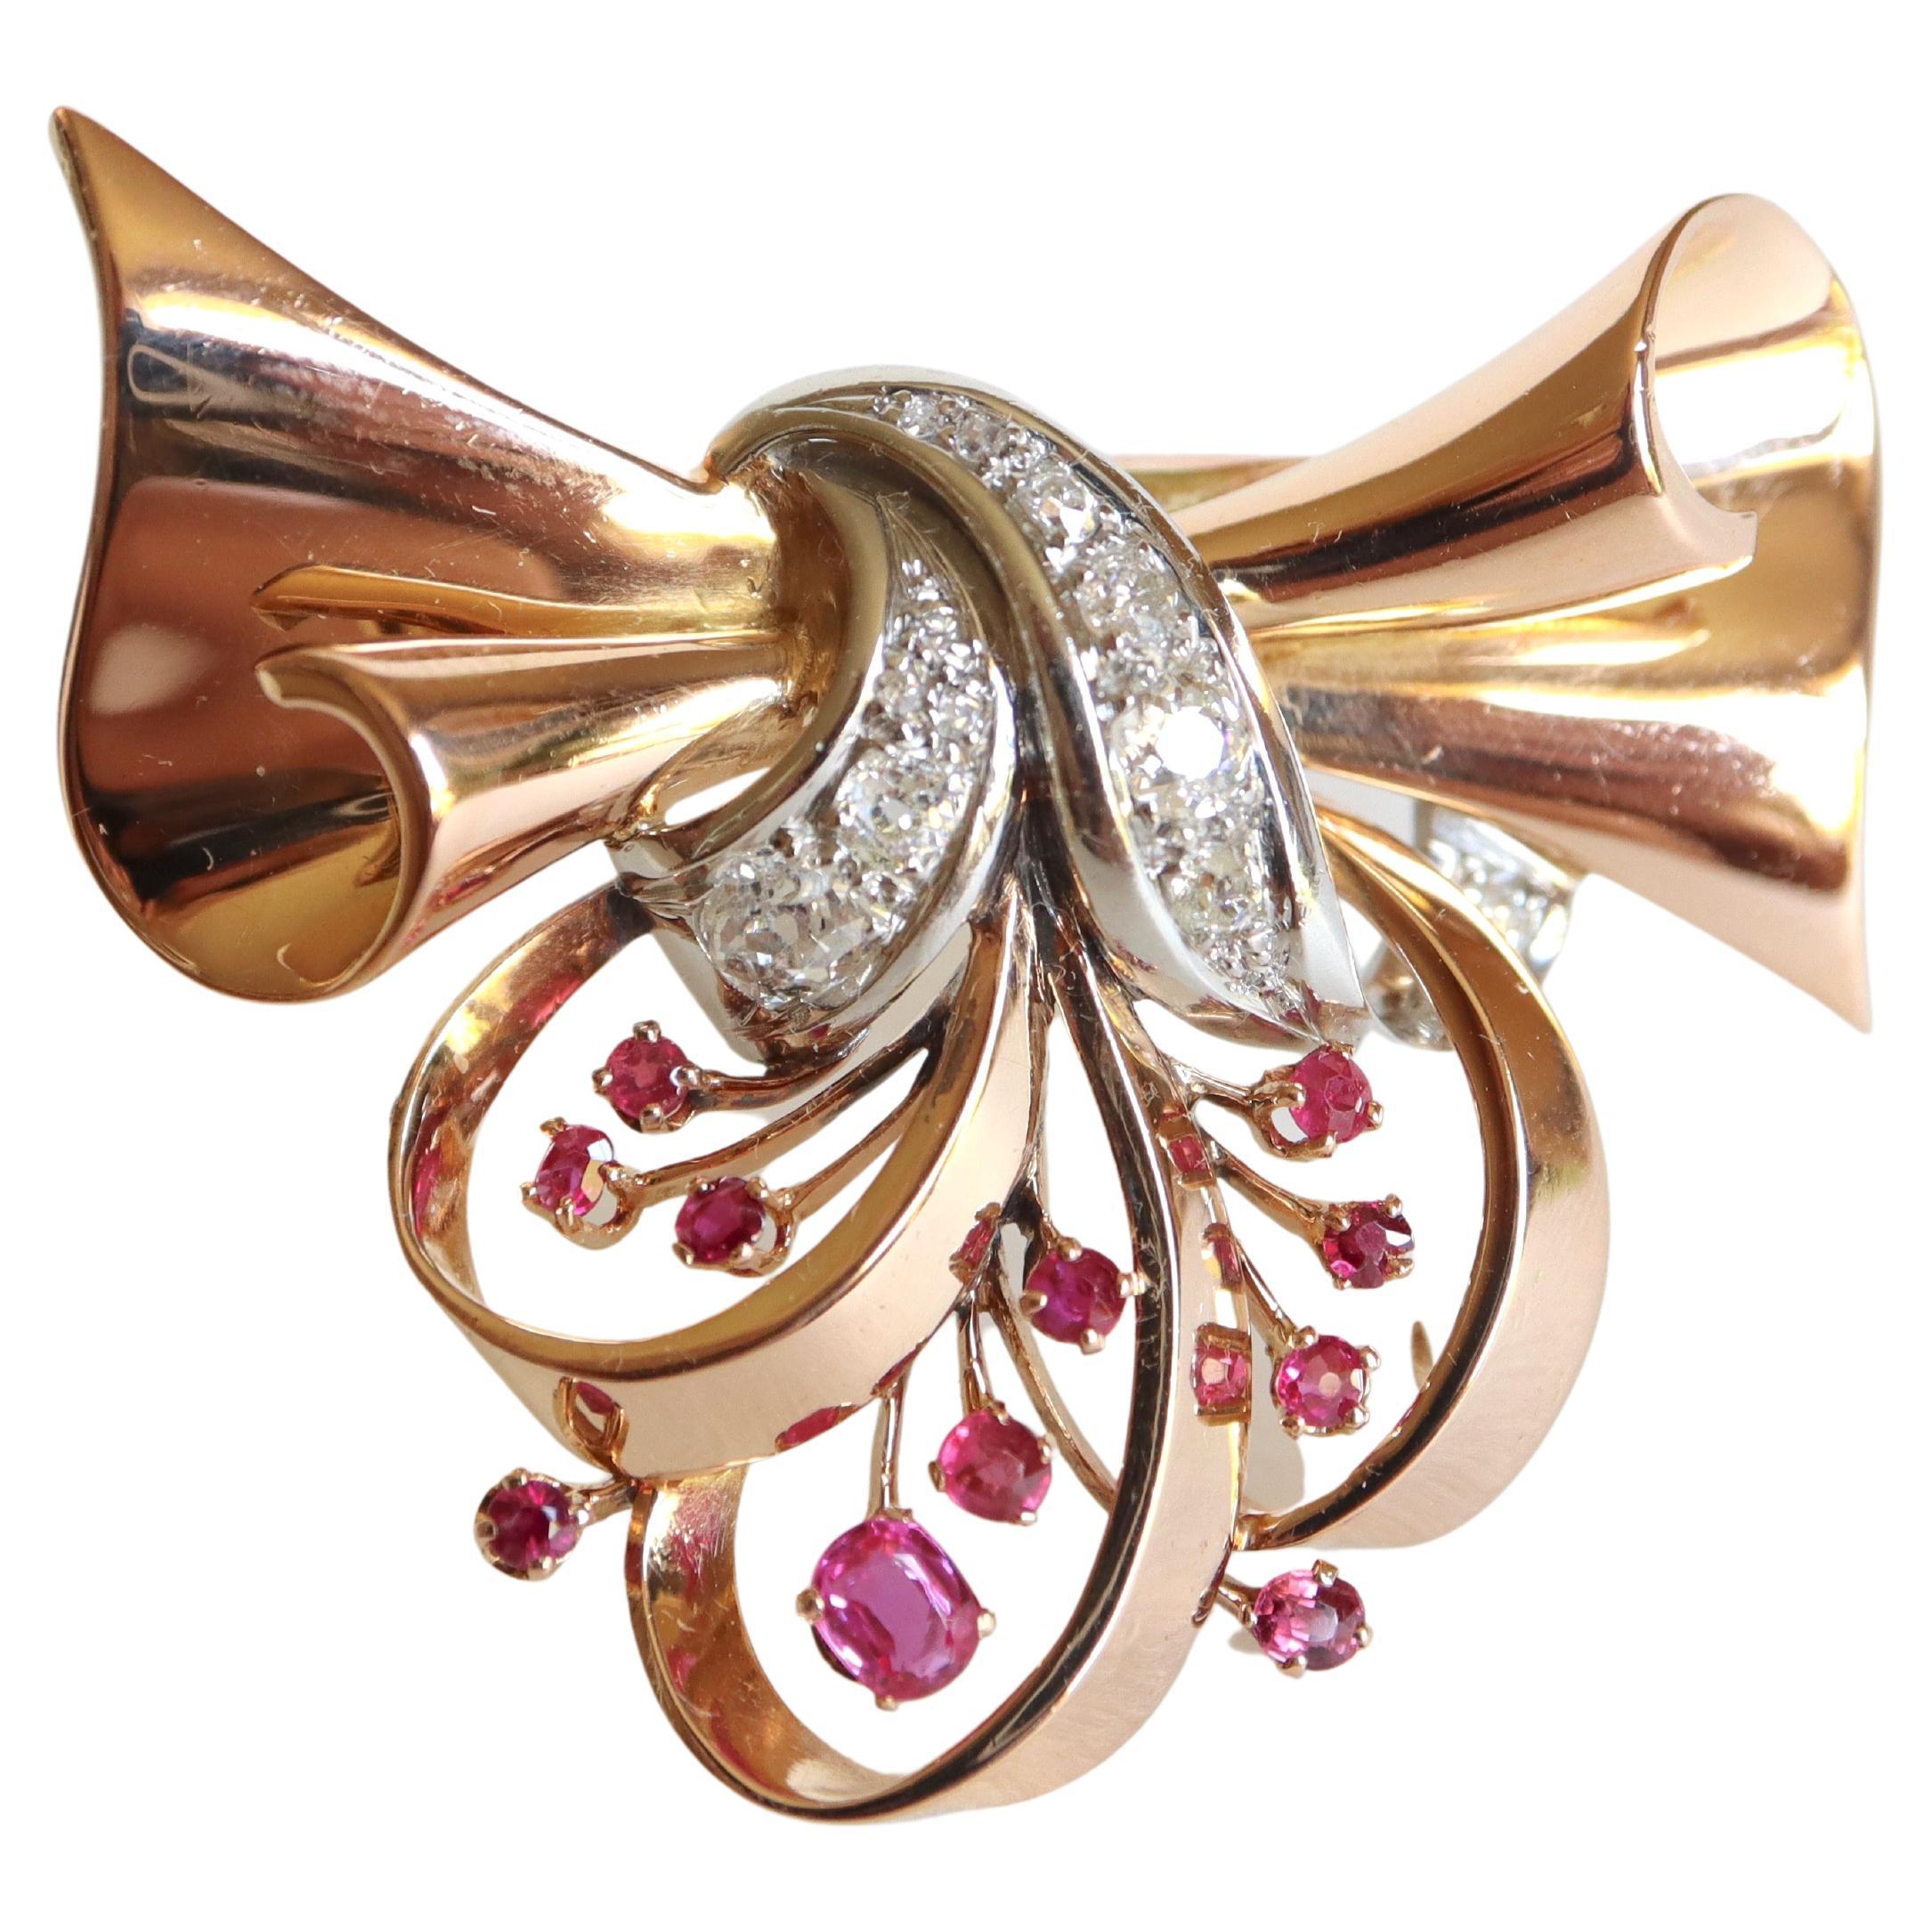 Lapel clip brooch in the shape of an eventful knot in 18K yellow gold and platinum, adorned with diamonds totaling approximately 0.60 carats and 14 rubies of various sizes.
Very beautiful elegant piece of jewelery from the 1940s. Brooch in the shape